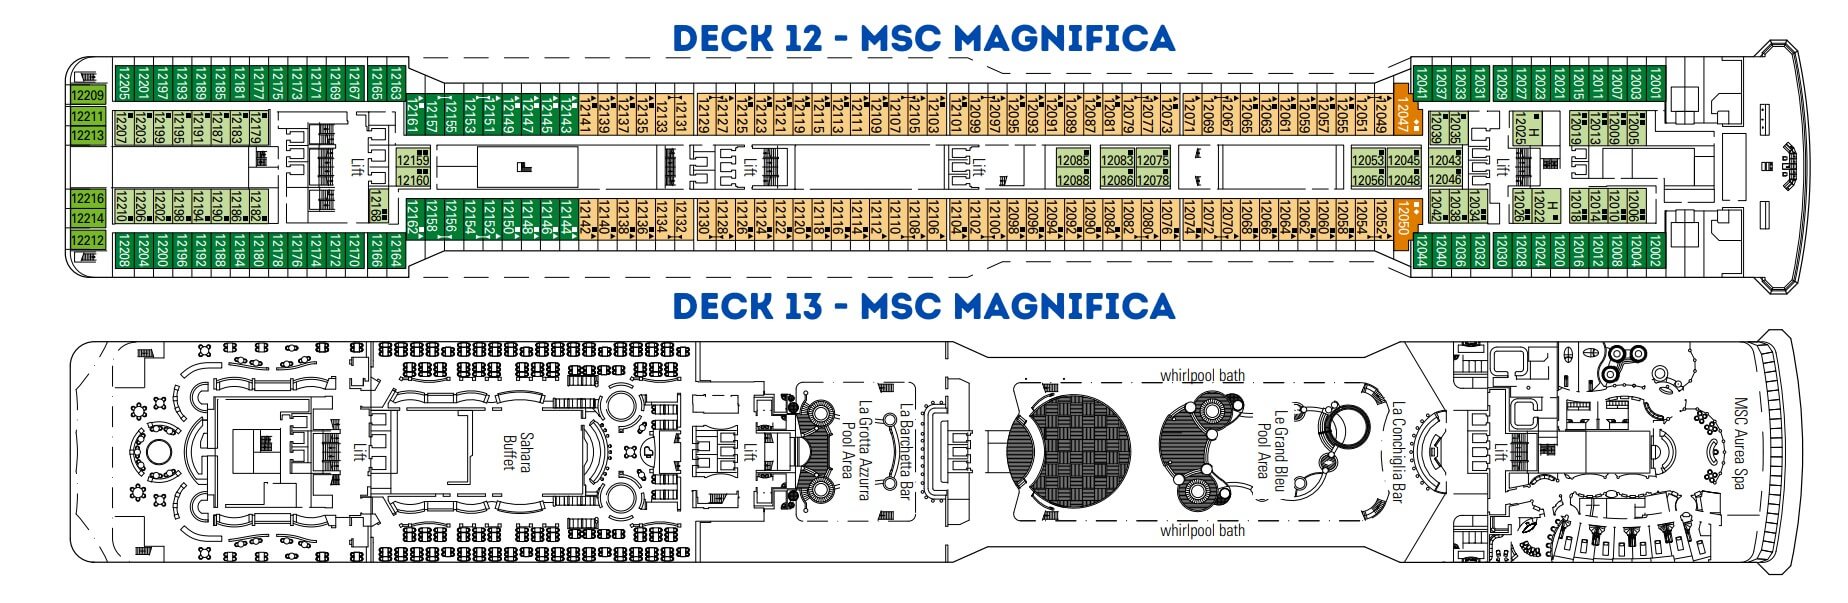 Potentially noisy cabins on MSC Magnifica